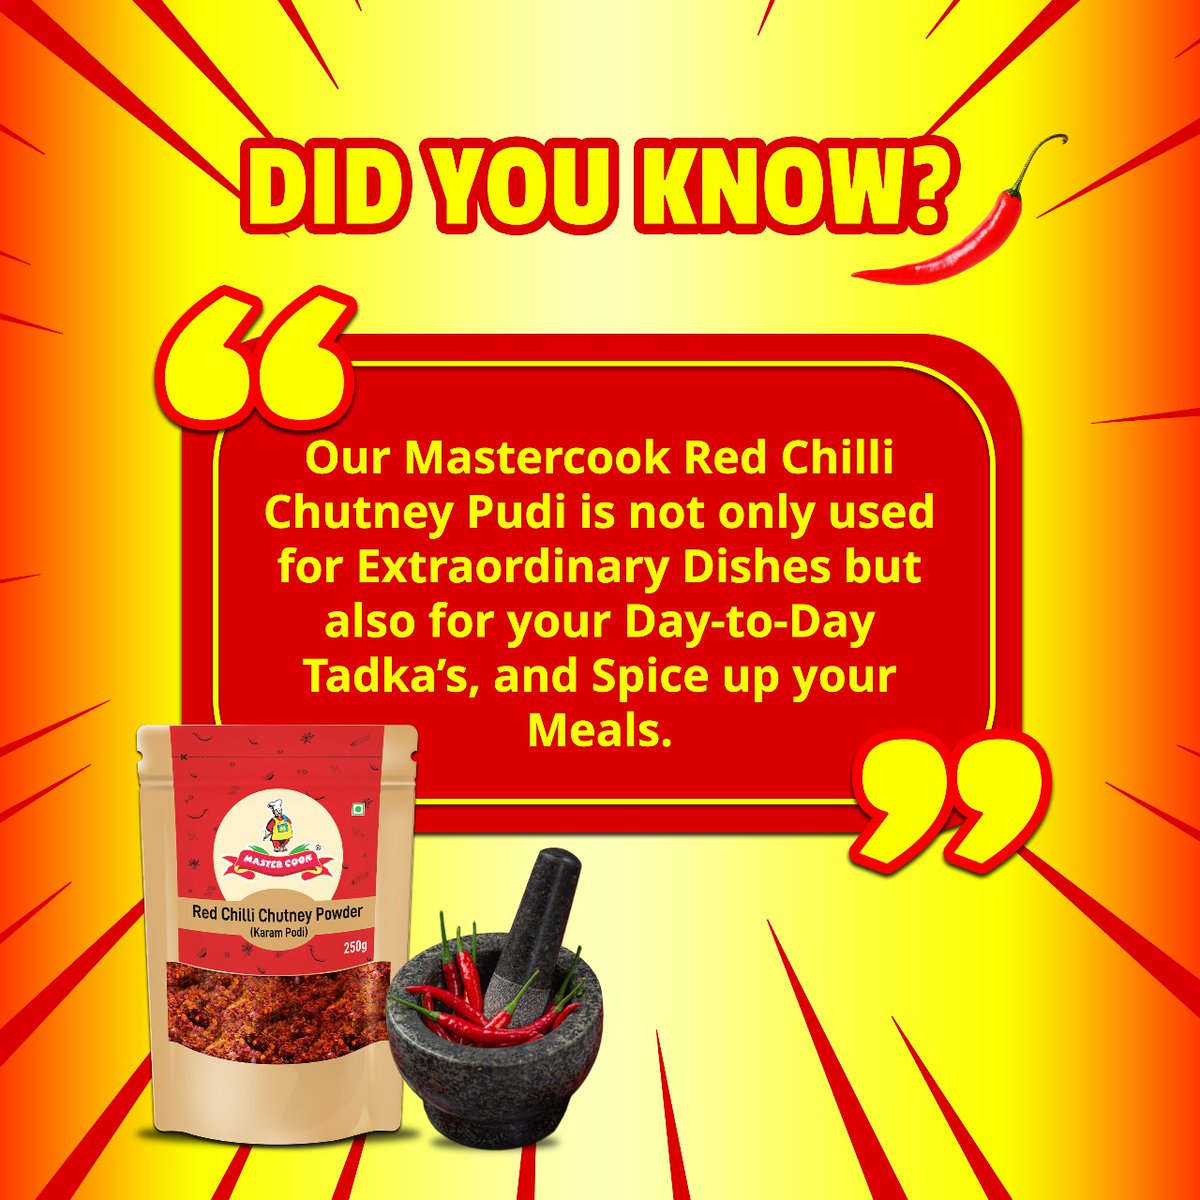 In what other ways do you use Red Chilli Chutney Powder? 😋🥳 Comment below!!!👇 #ChutneyPudiMagic #FlavorExploration #pickle #mastercook #SavingsAlert #HalfPriceHappiness #ProductLaunch #websitelaunch #websites #staytuned #pickles #chutney #offers #storefront